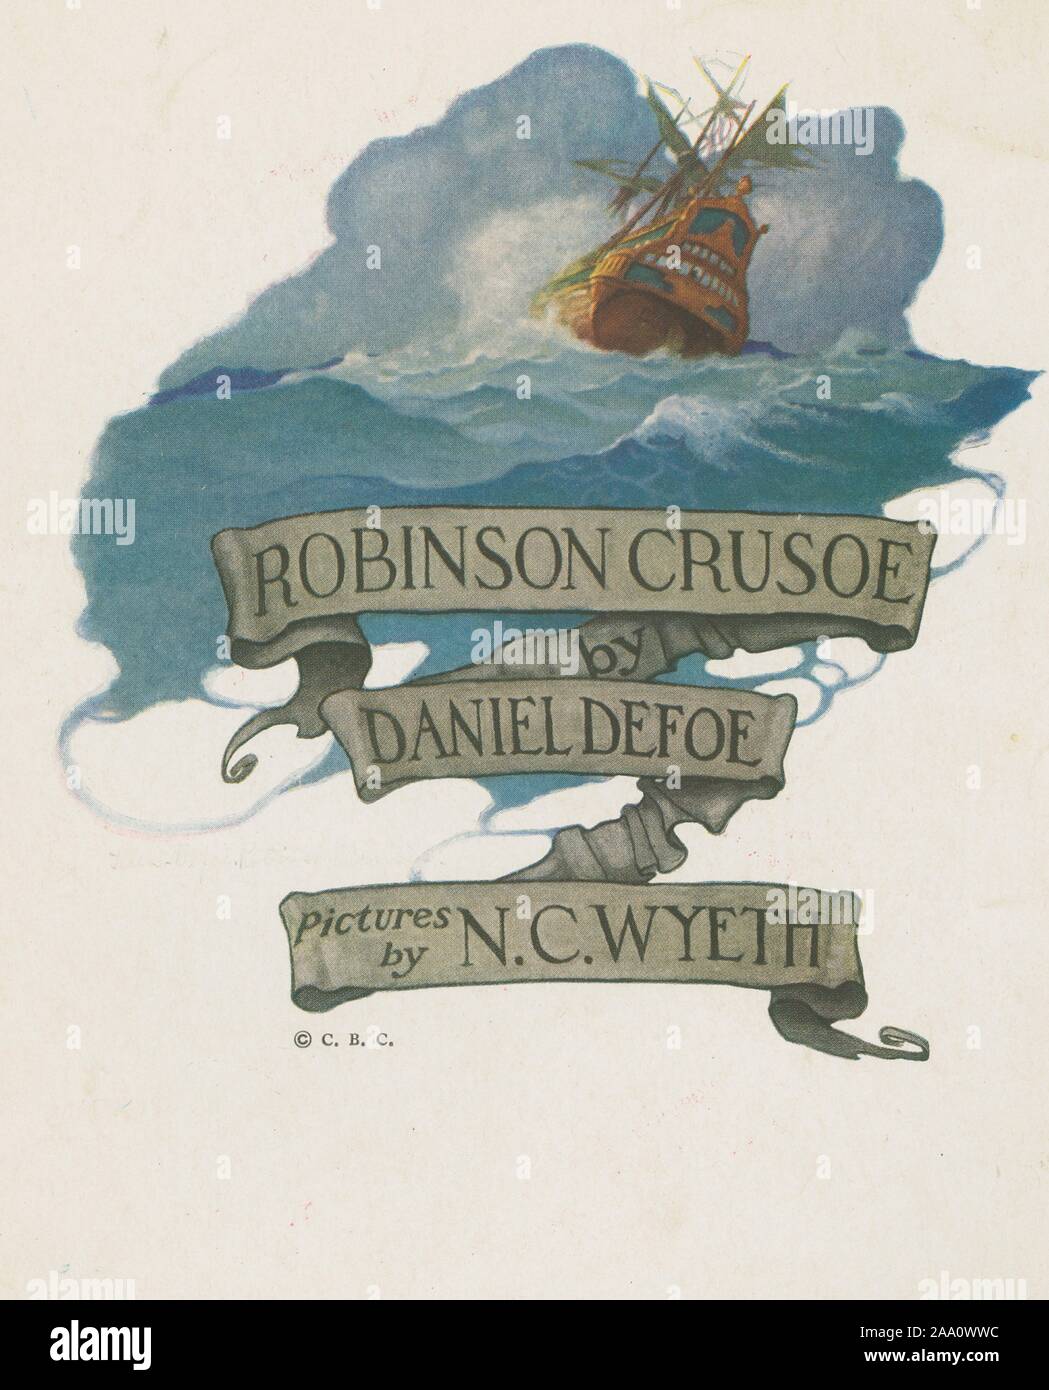 Illustration of the title page of the book 'Robinson Crusoe' by author Daniel Defoe, featuring Crusoe's ship on a stormy sea, illustrated by Newell Convers Wyeth, 1920. From the New York Public Library. () Stock Photo